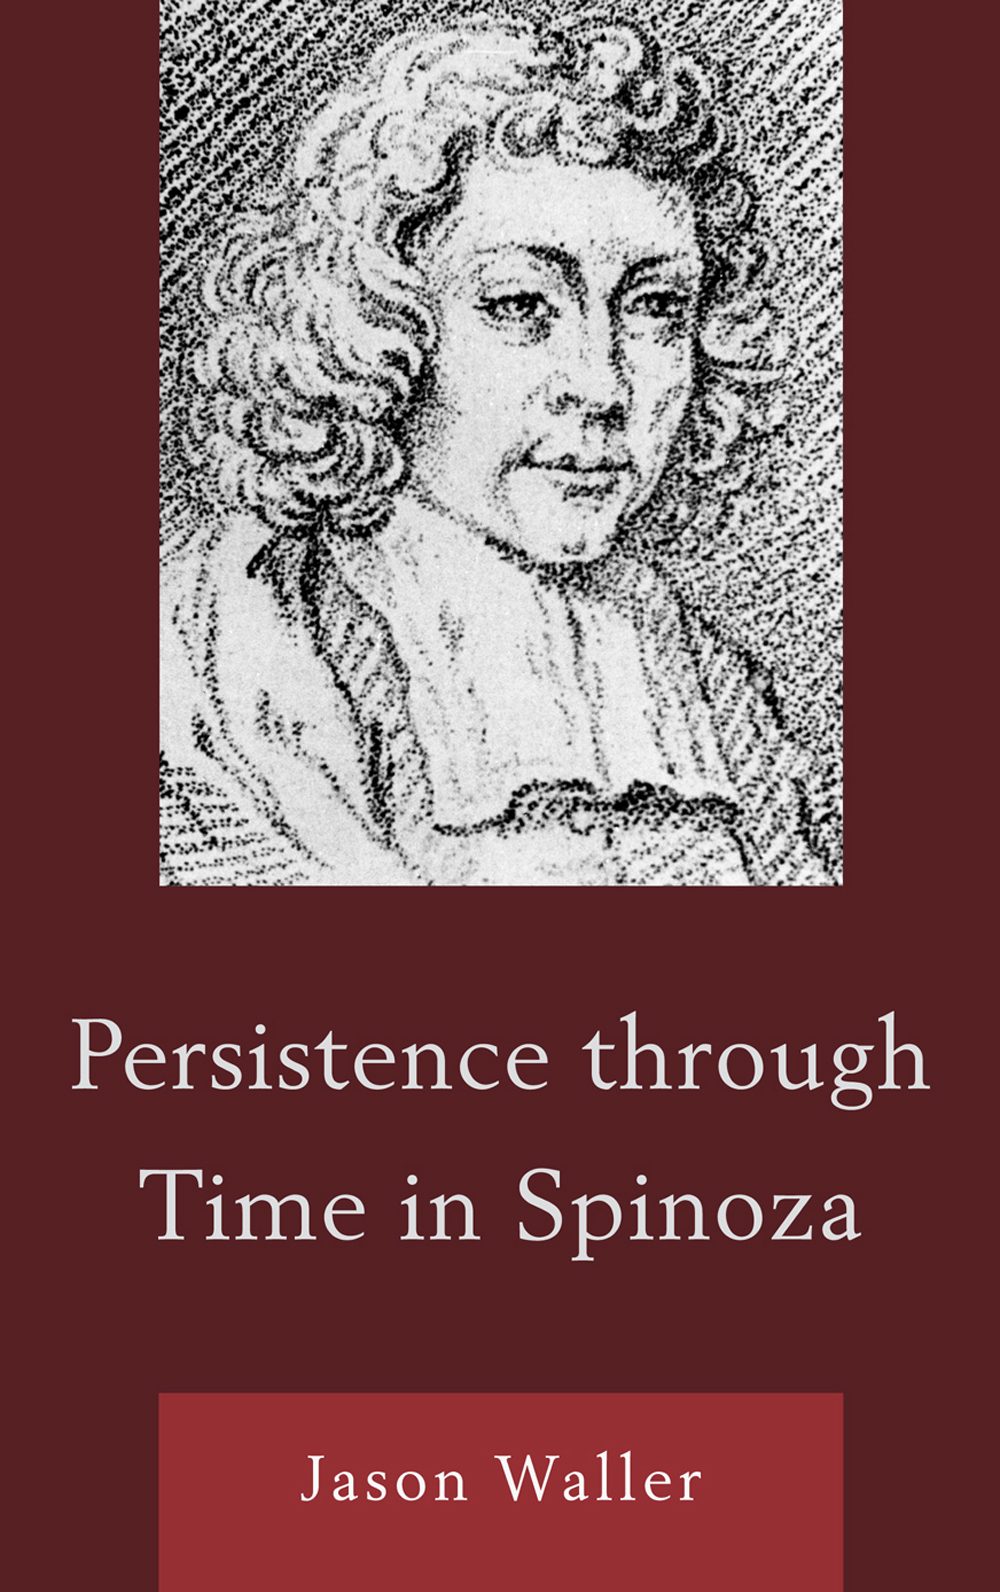 Persistence through Time in Spinoza